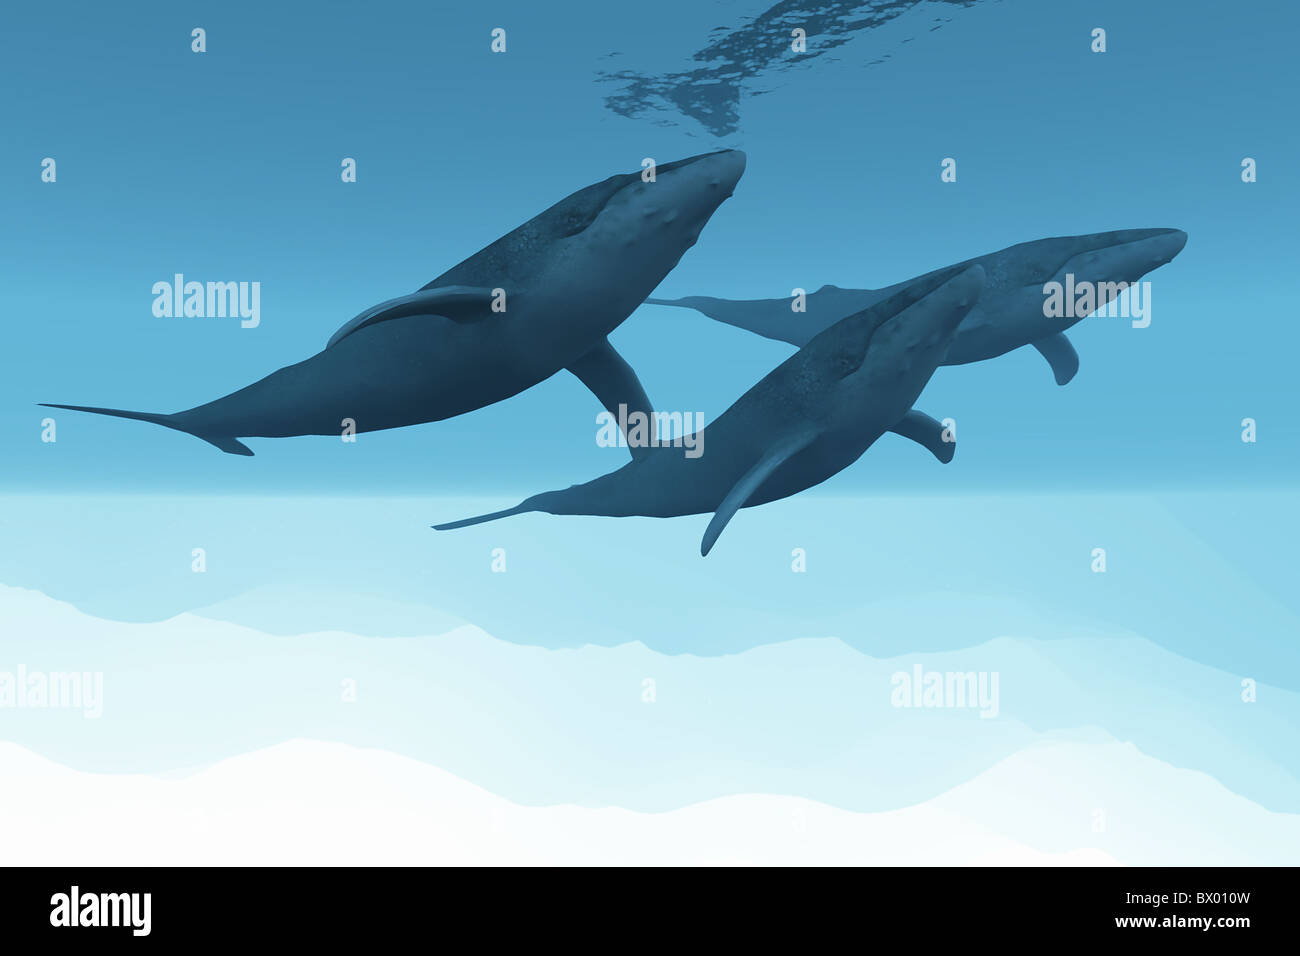 Three Humpback whales swim together in the vast open ocean. Stock Photo